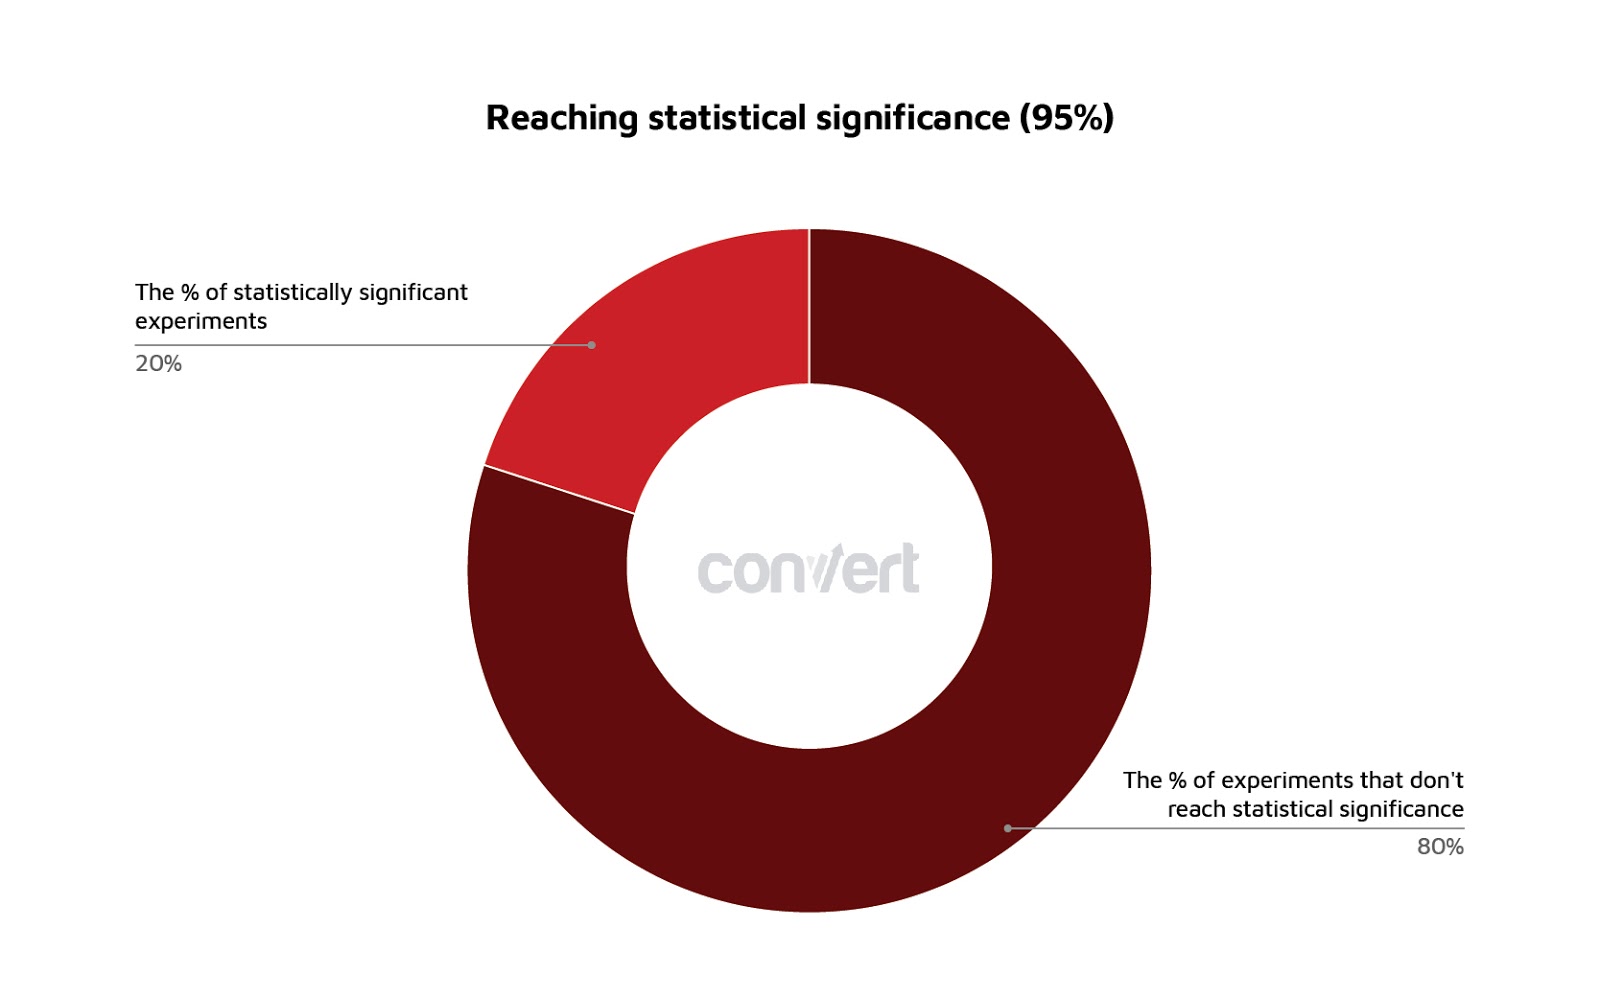 chart showing the percentage of experiments that reach statistical significance.